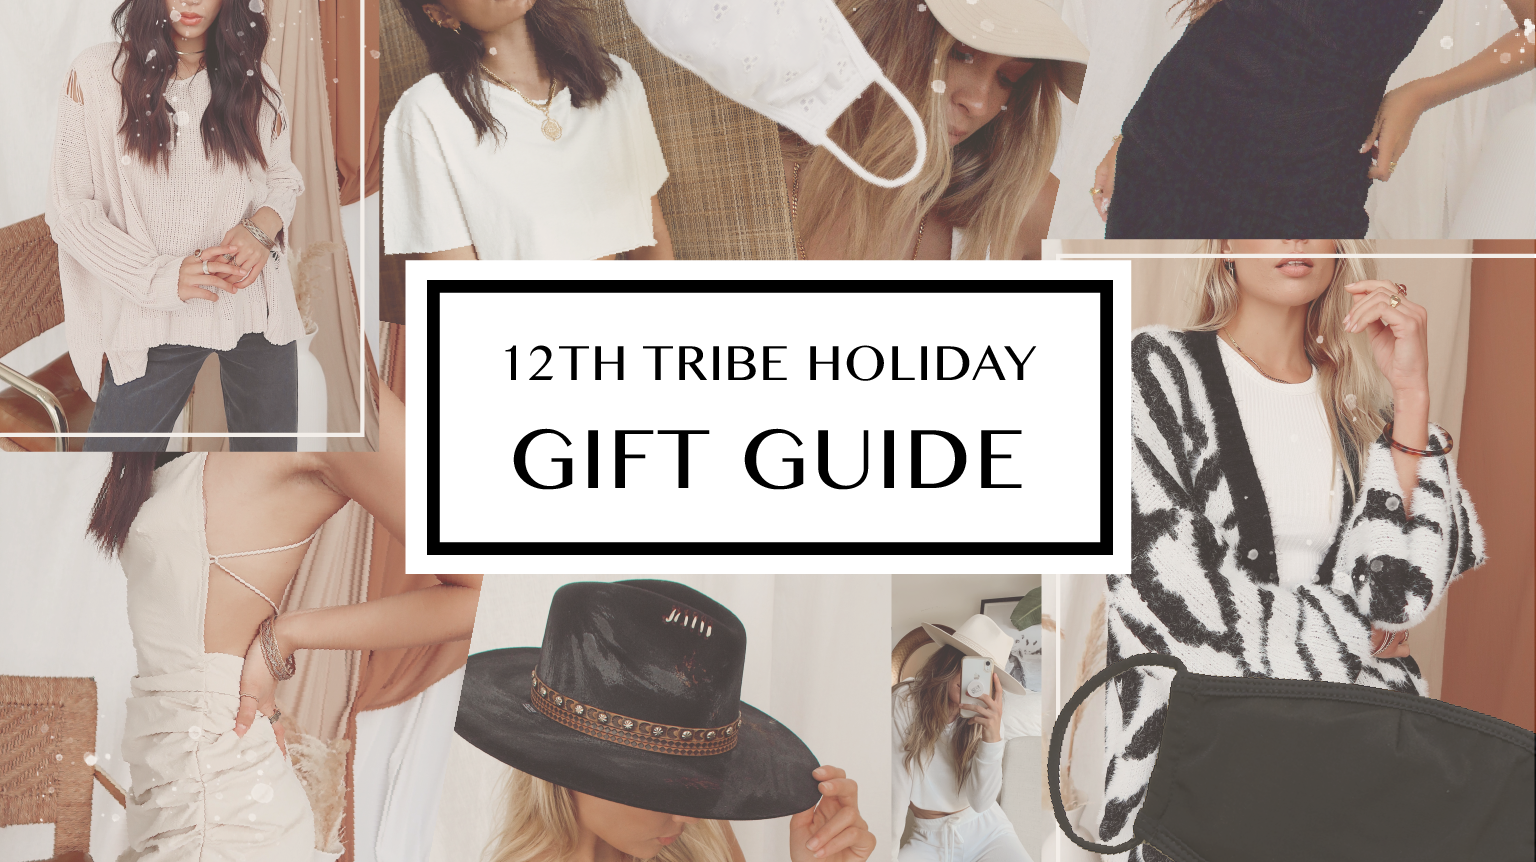 12th Tribe Holiday Gift Guide